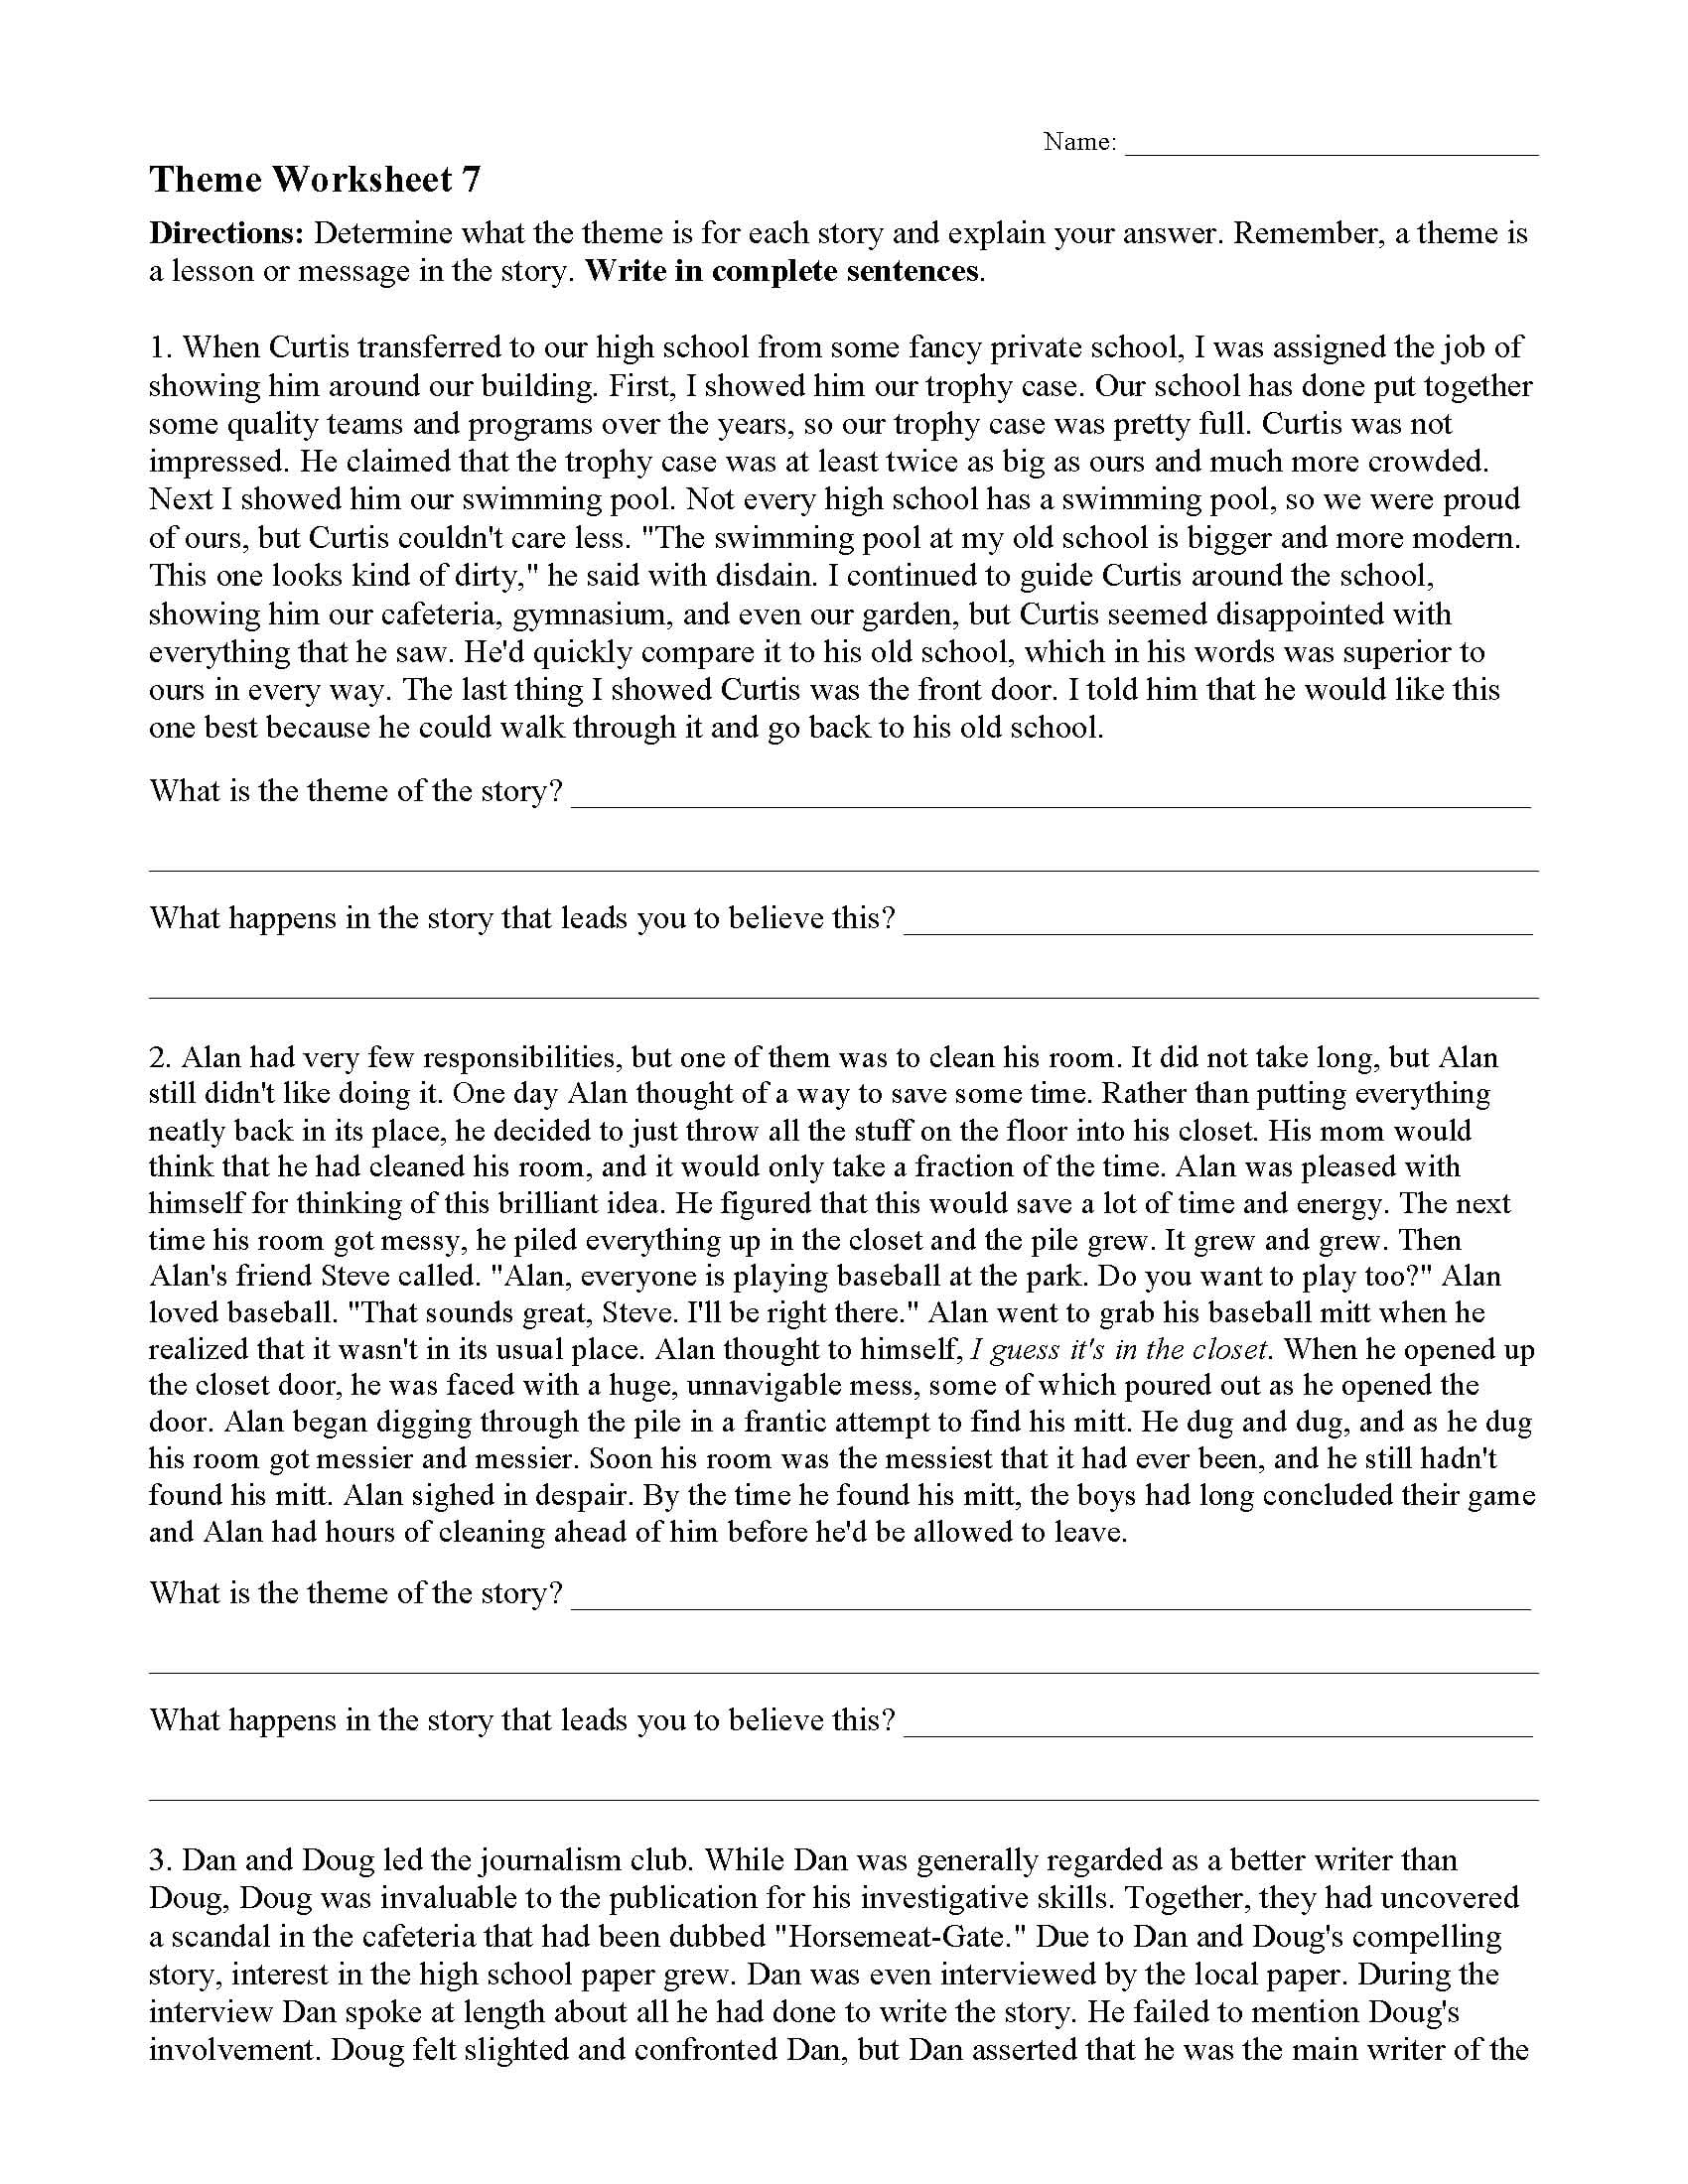 Free Printable Reading Comprehension Worksheets For 10th Grade